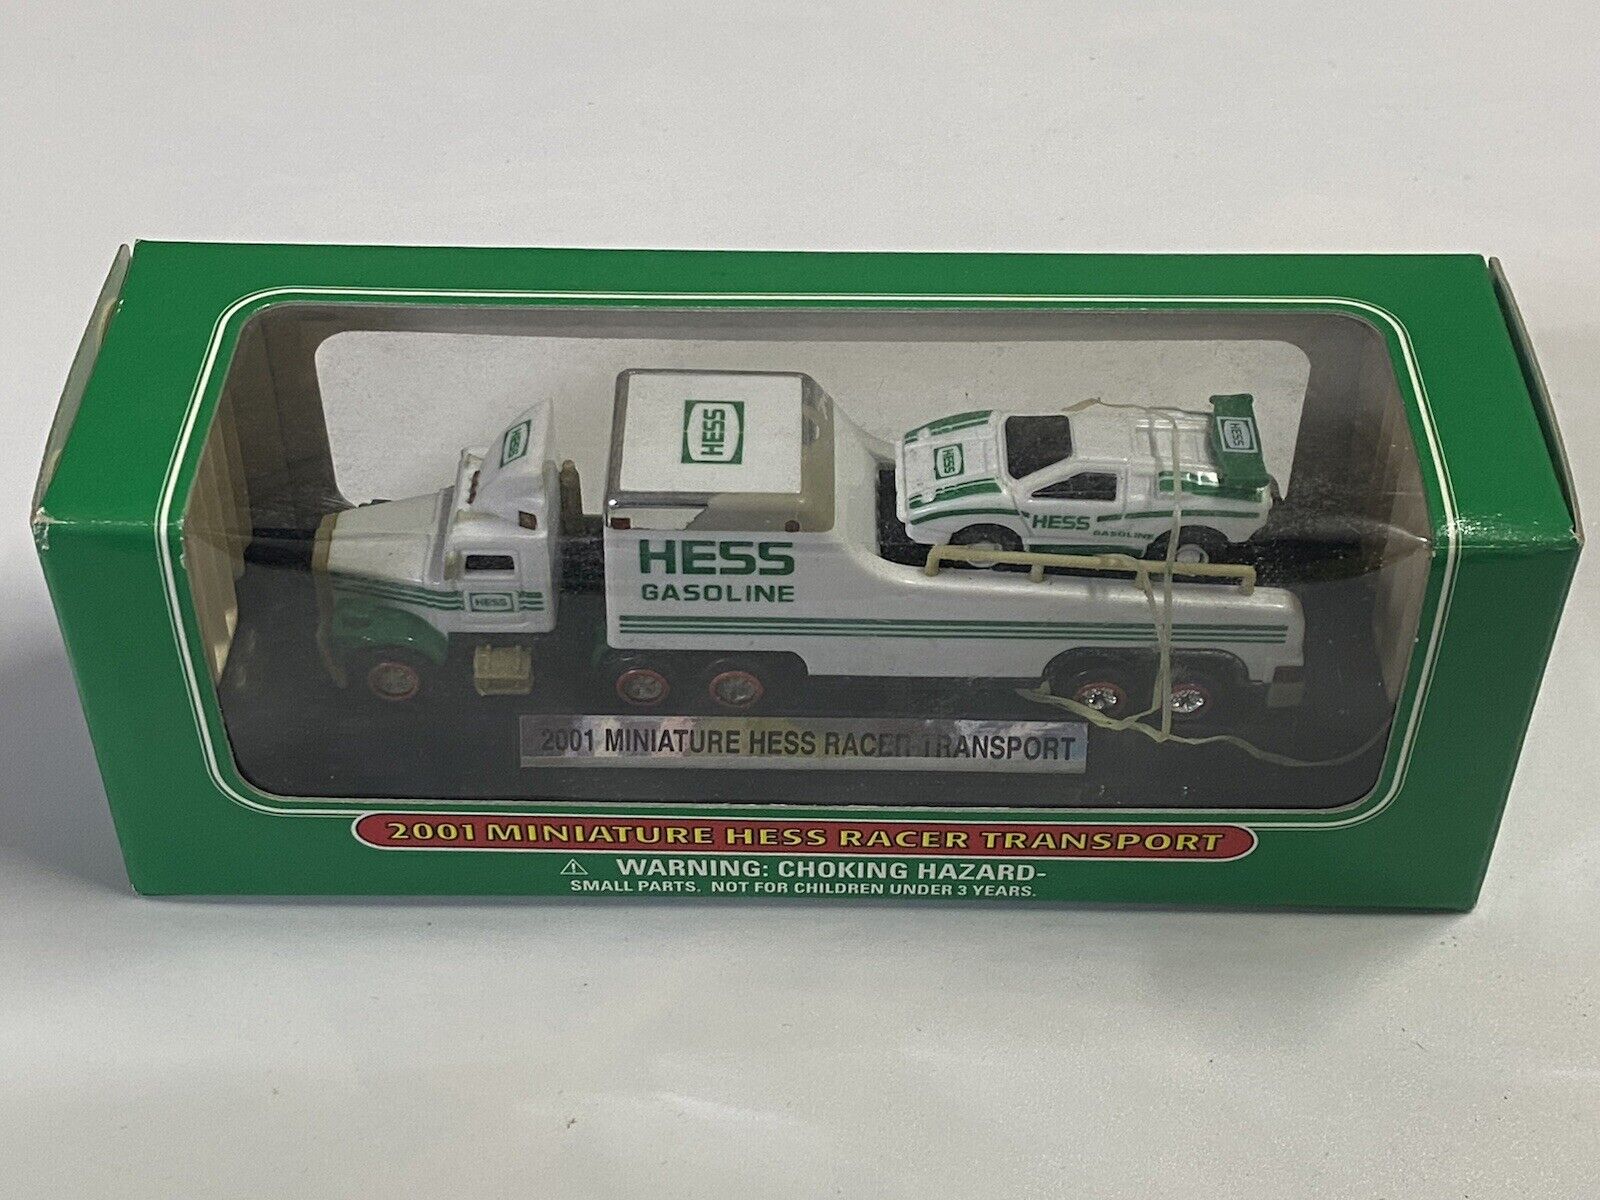 HESS GAS 2001 MINIATURE HESS RACER TRANSPORT COLLECTIBLE NEW IN BOX